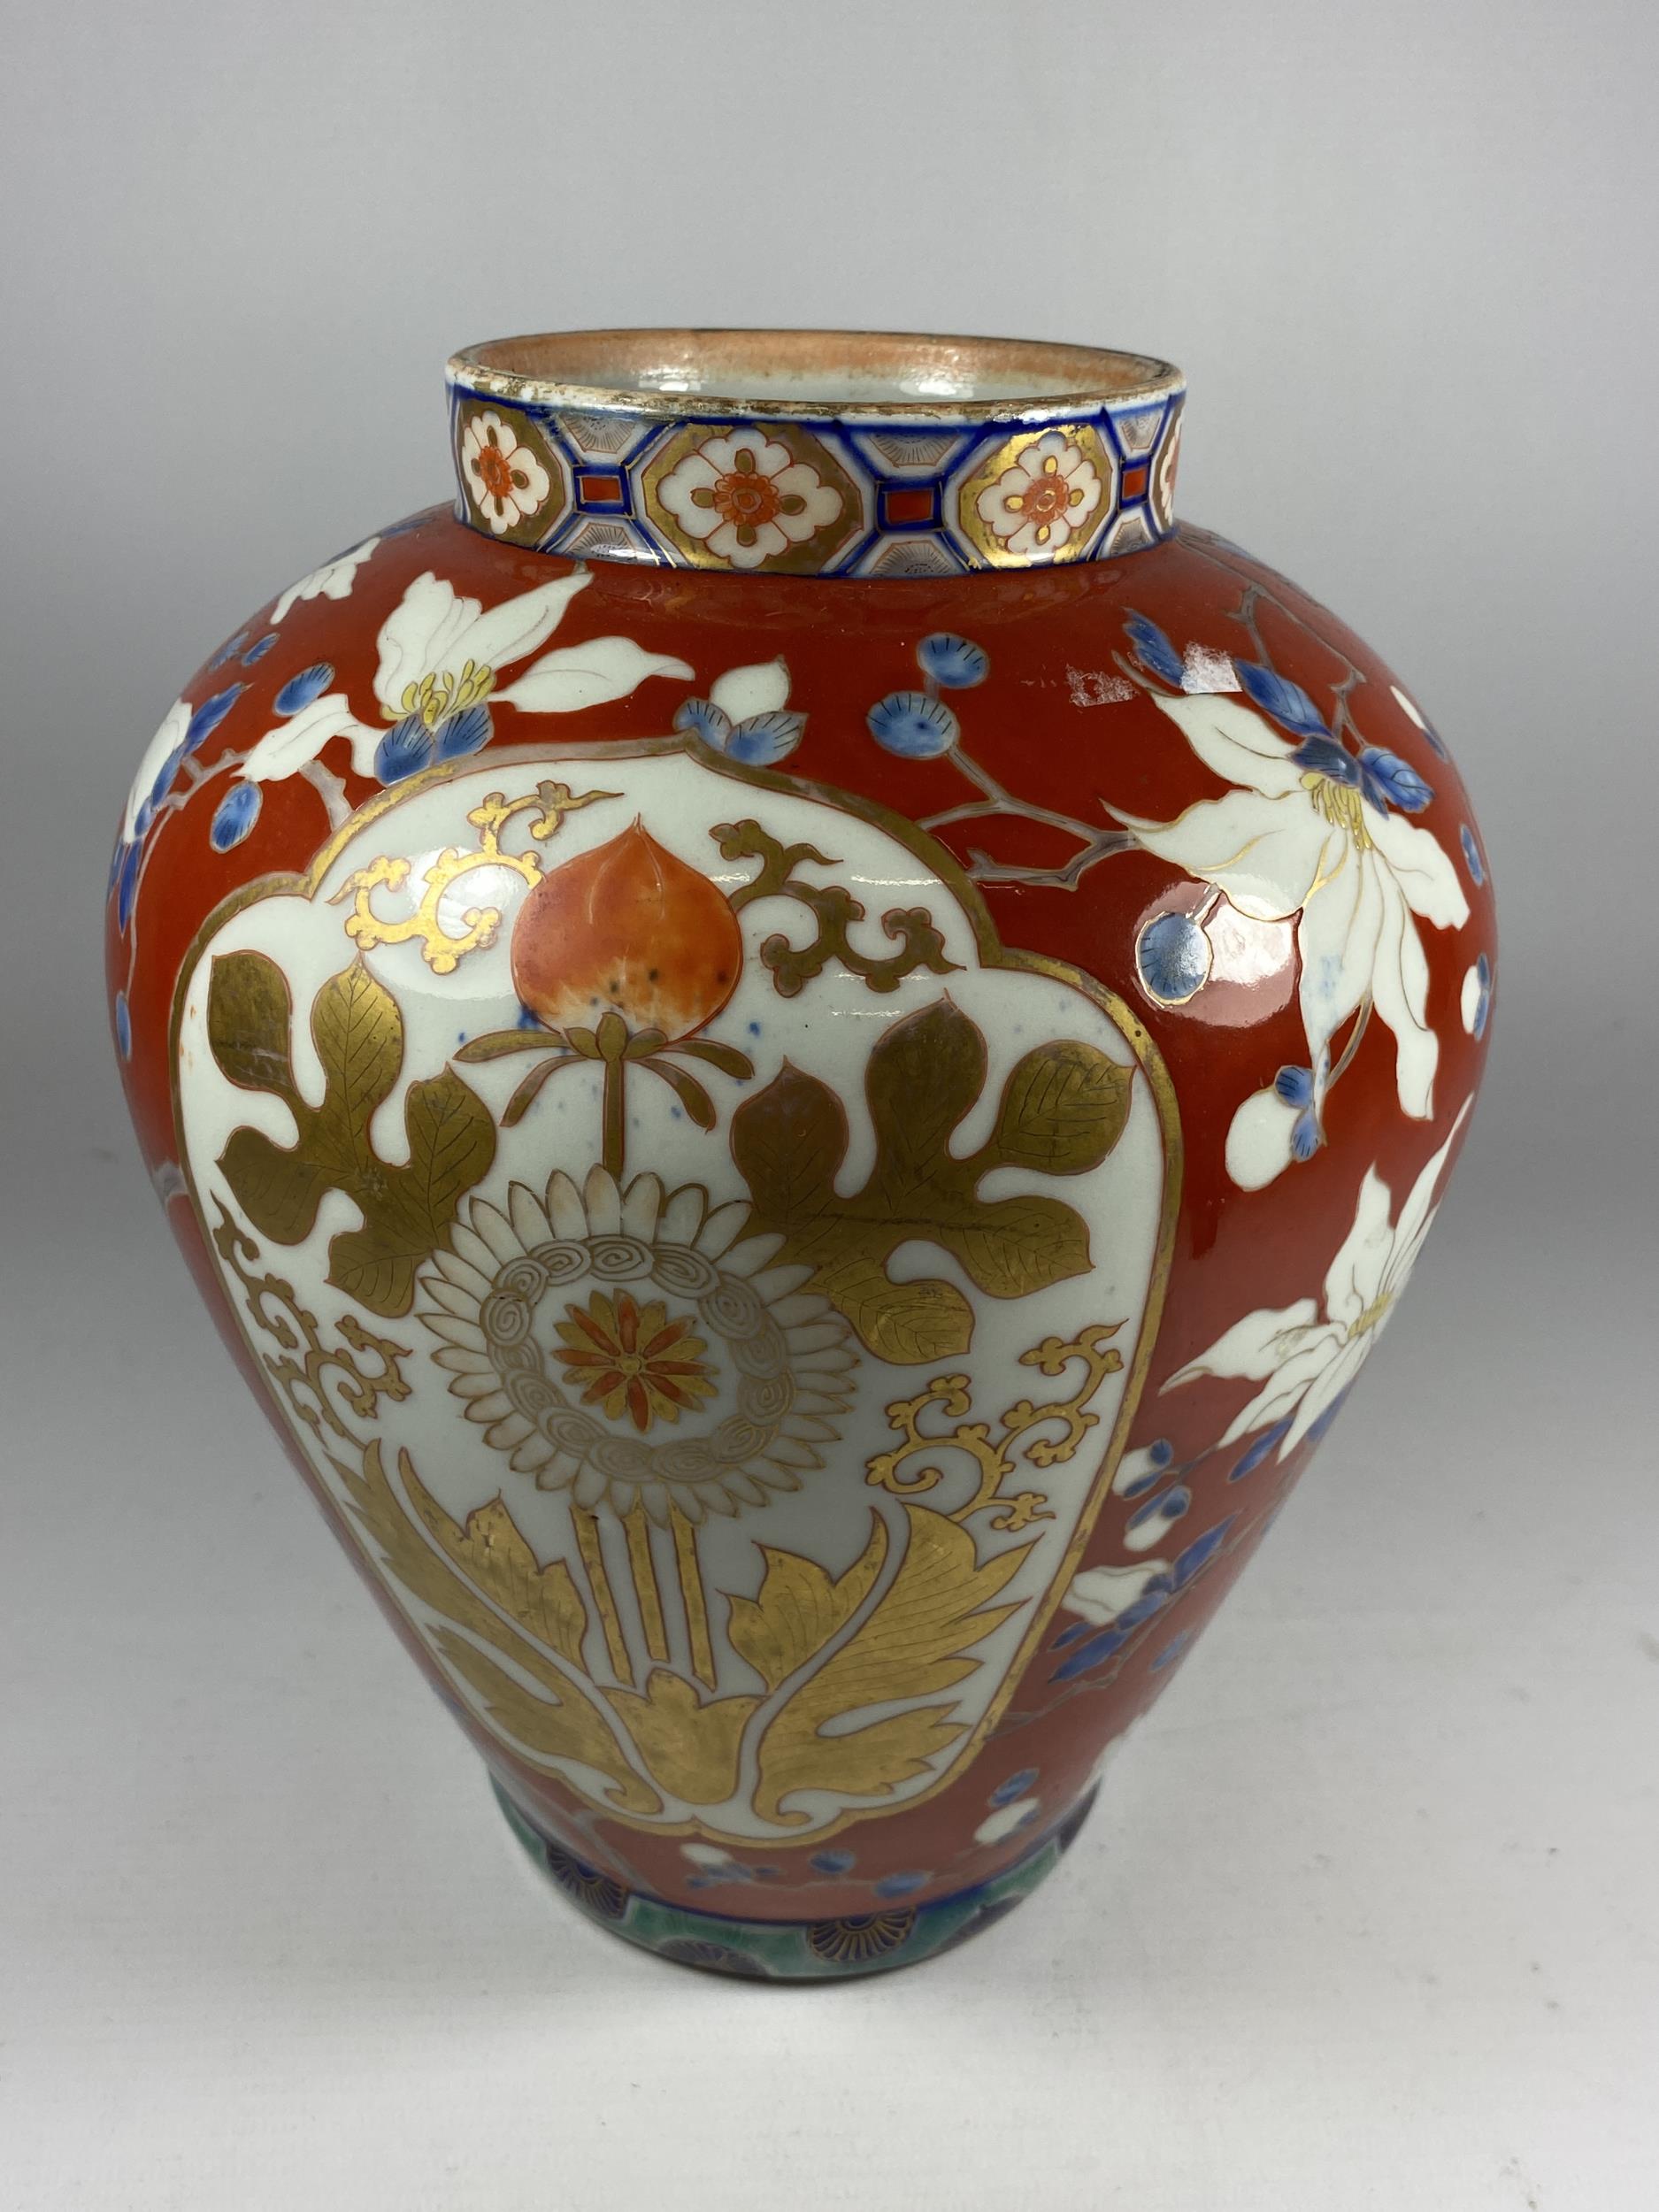 A LARGE JAPANESE MEIJI PERIOD (1868-1912) OVOID FORM WITH RED ENAMEL AND FLORAL DESIGN, HEIGHT 24CM - Image 3 of 6